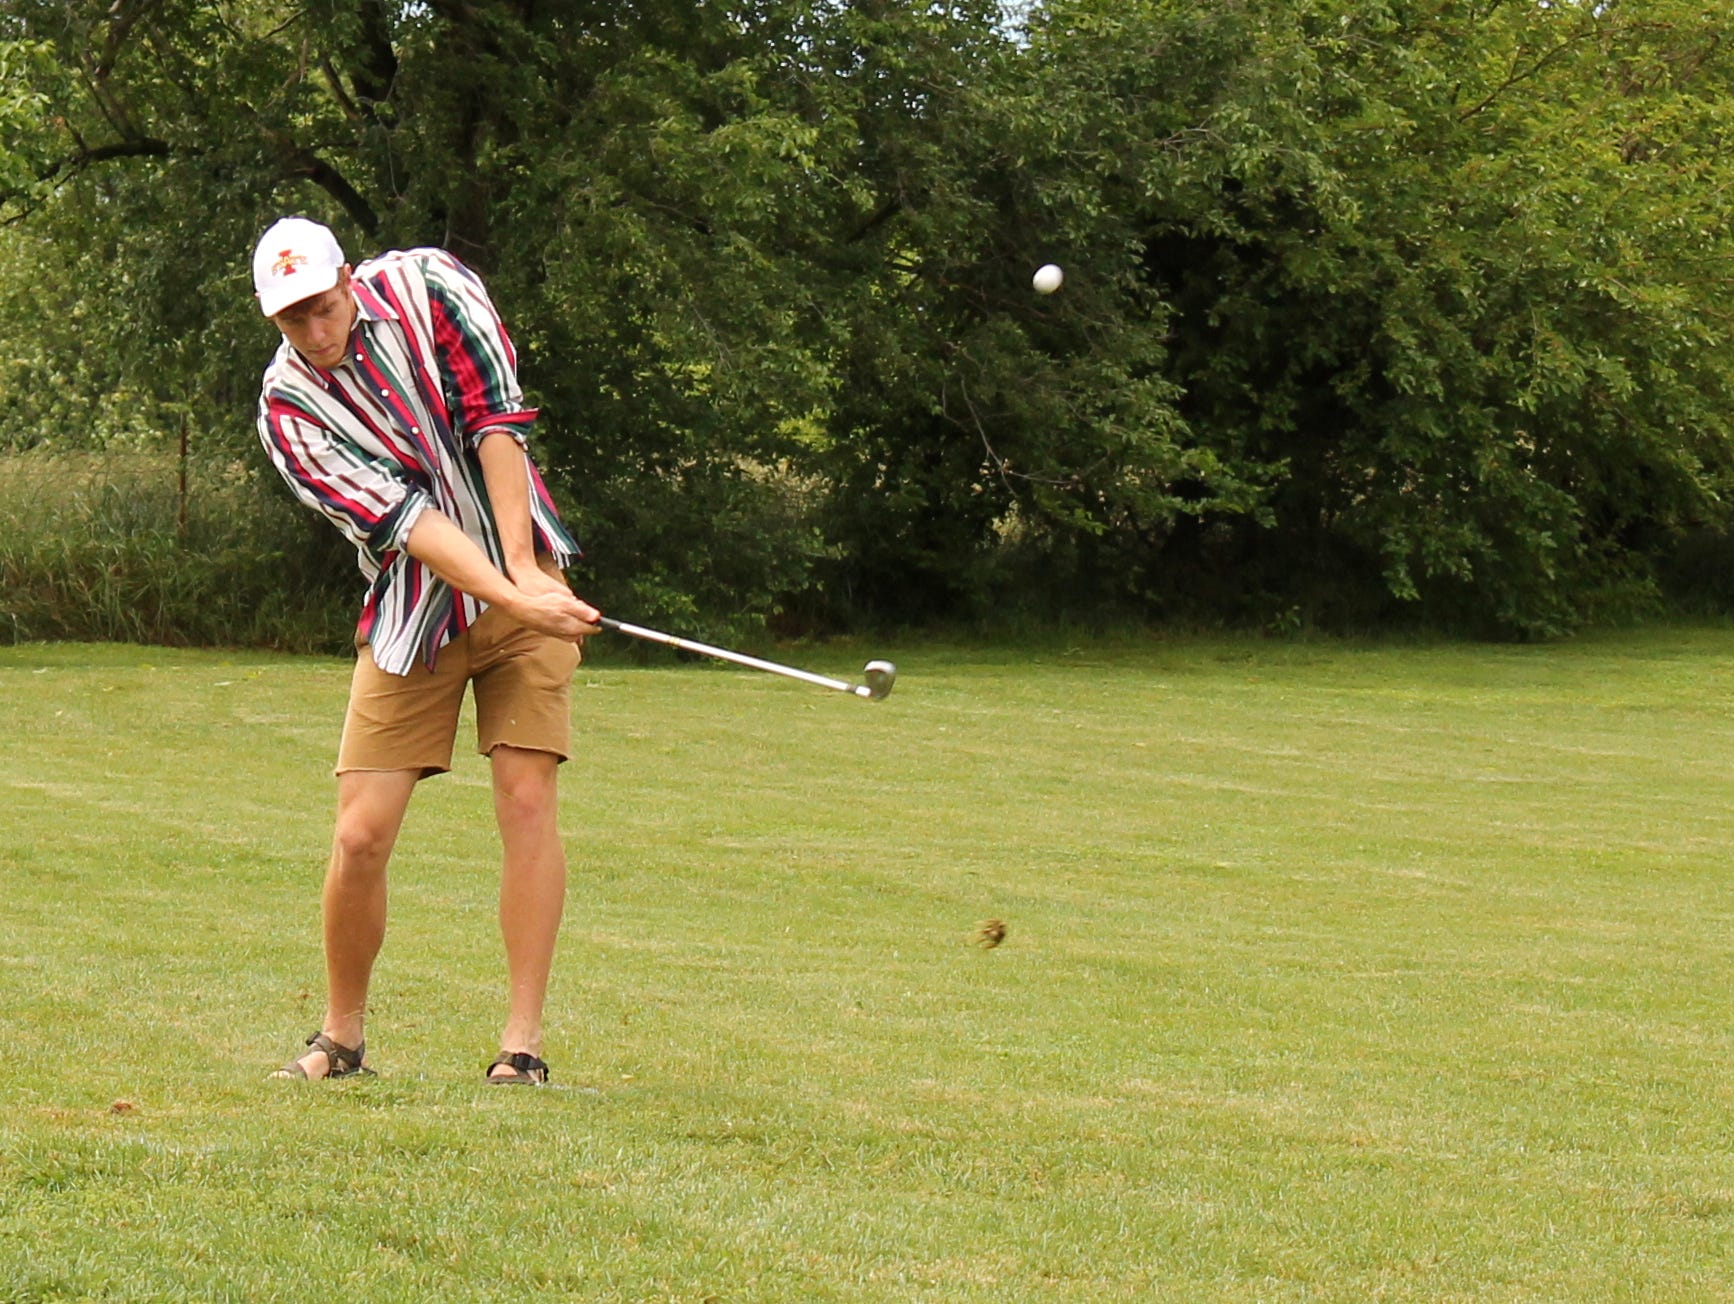 Nixa's Chase Allen hits a tee shot on the second hole of a nine-hole golf course he created in his backyard in order to host the Allen Open golf tournament.